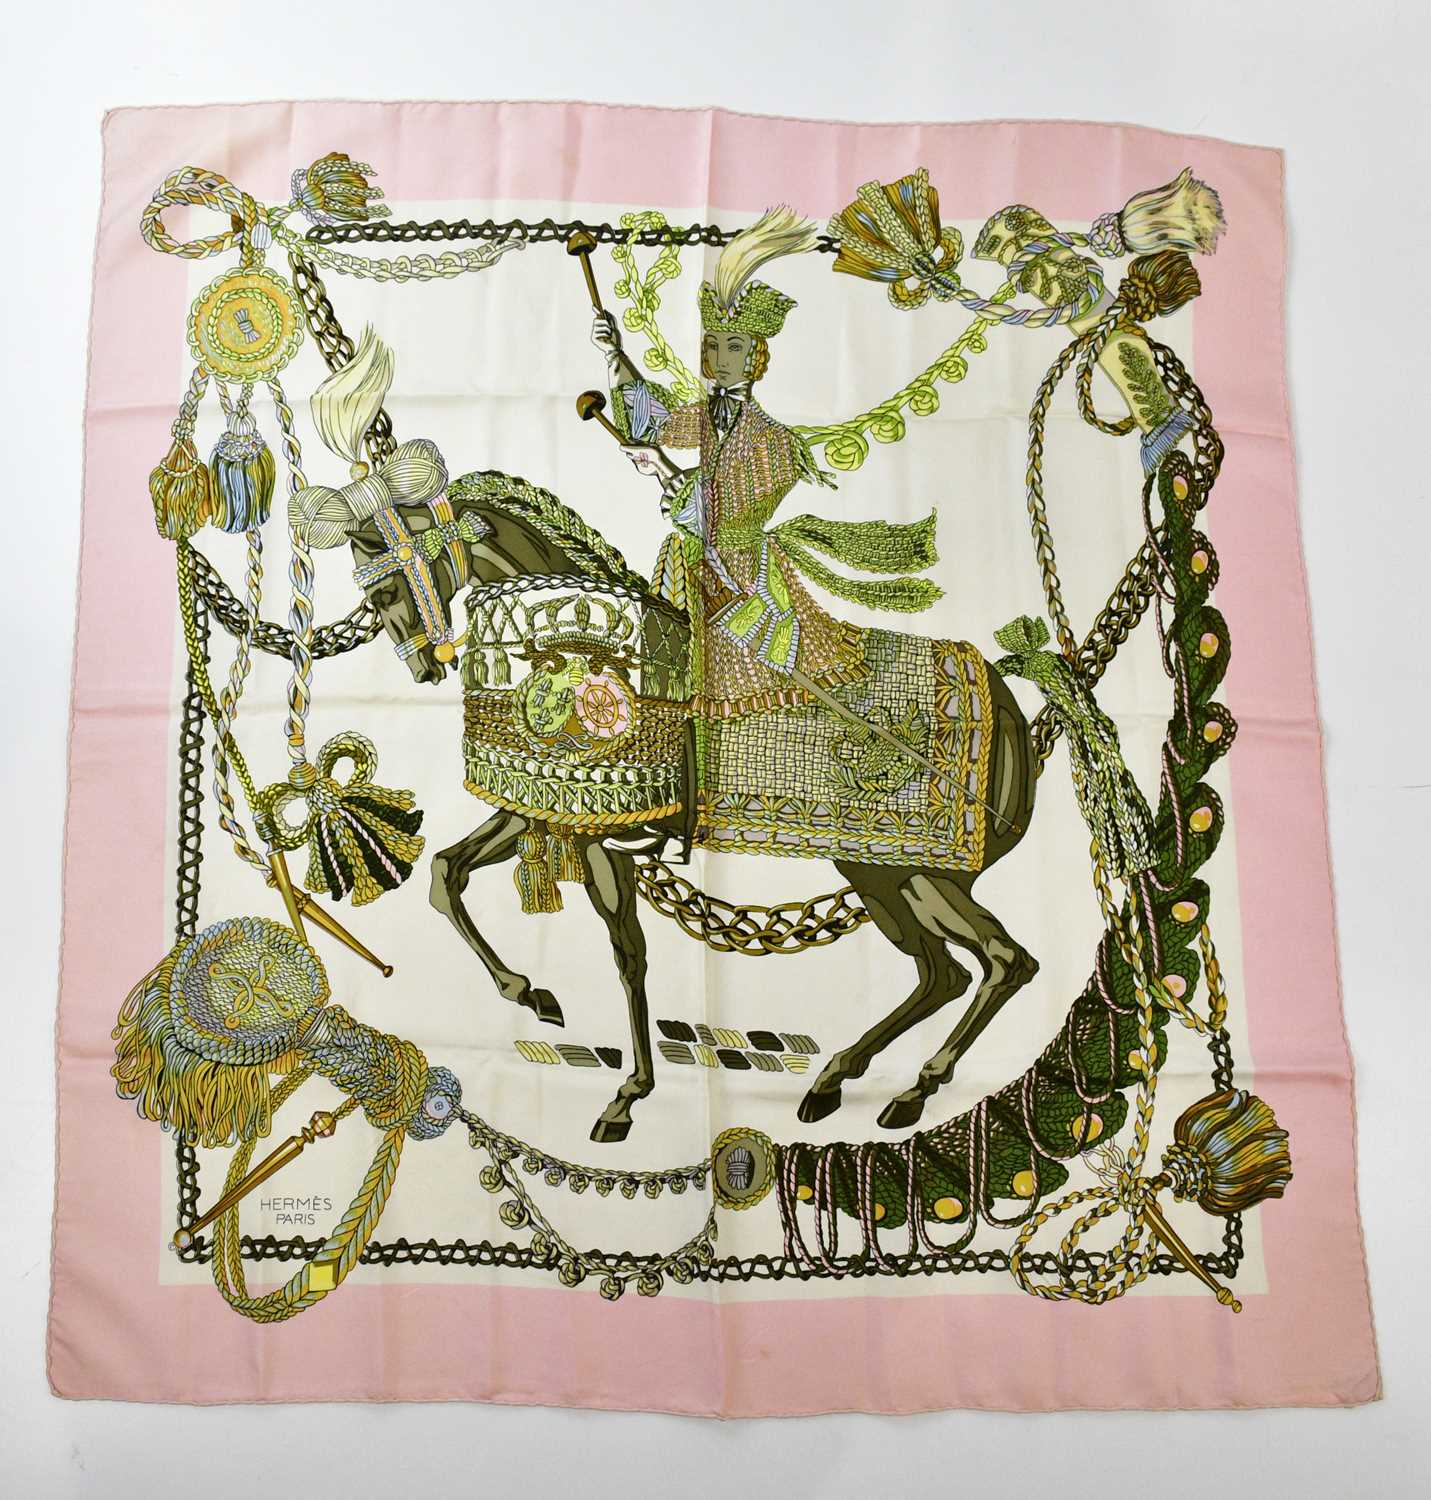 HERMÈS; a rare 100% silk Le Timbalier scarf, designed by Marie-Francoise Philippe in c.1961,